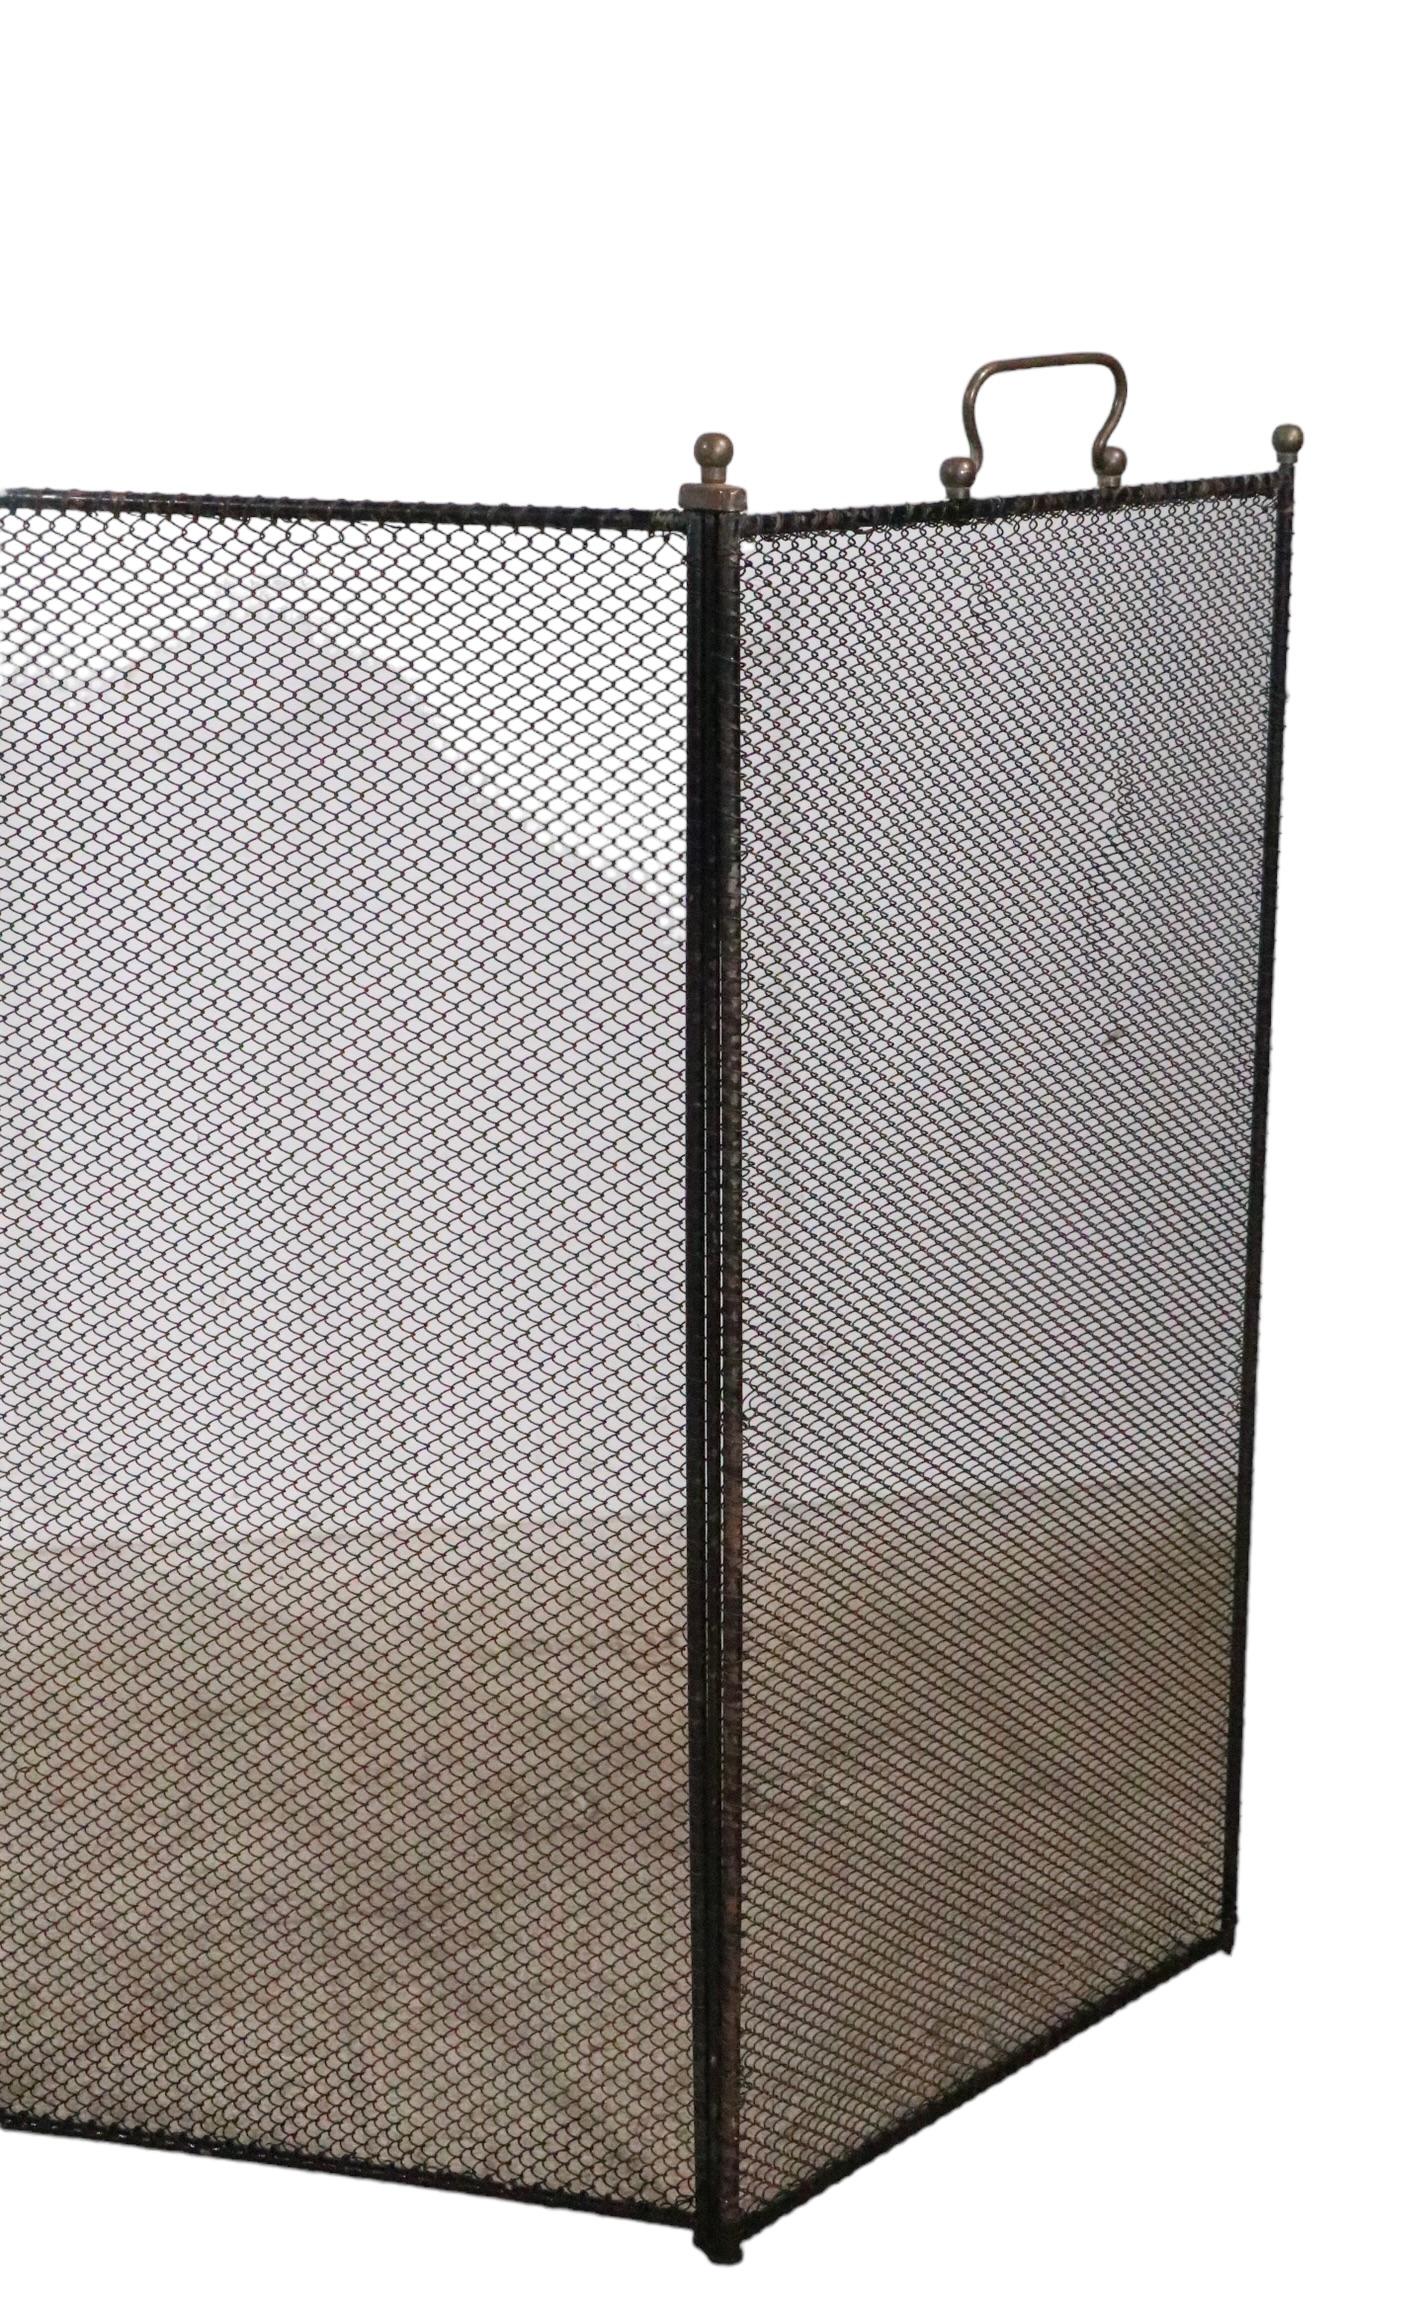 Antique Iron Brass and Mesh Four Panel Folding   Fireplace Screen  2